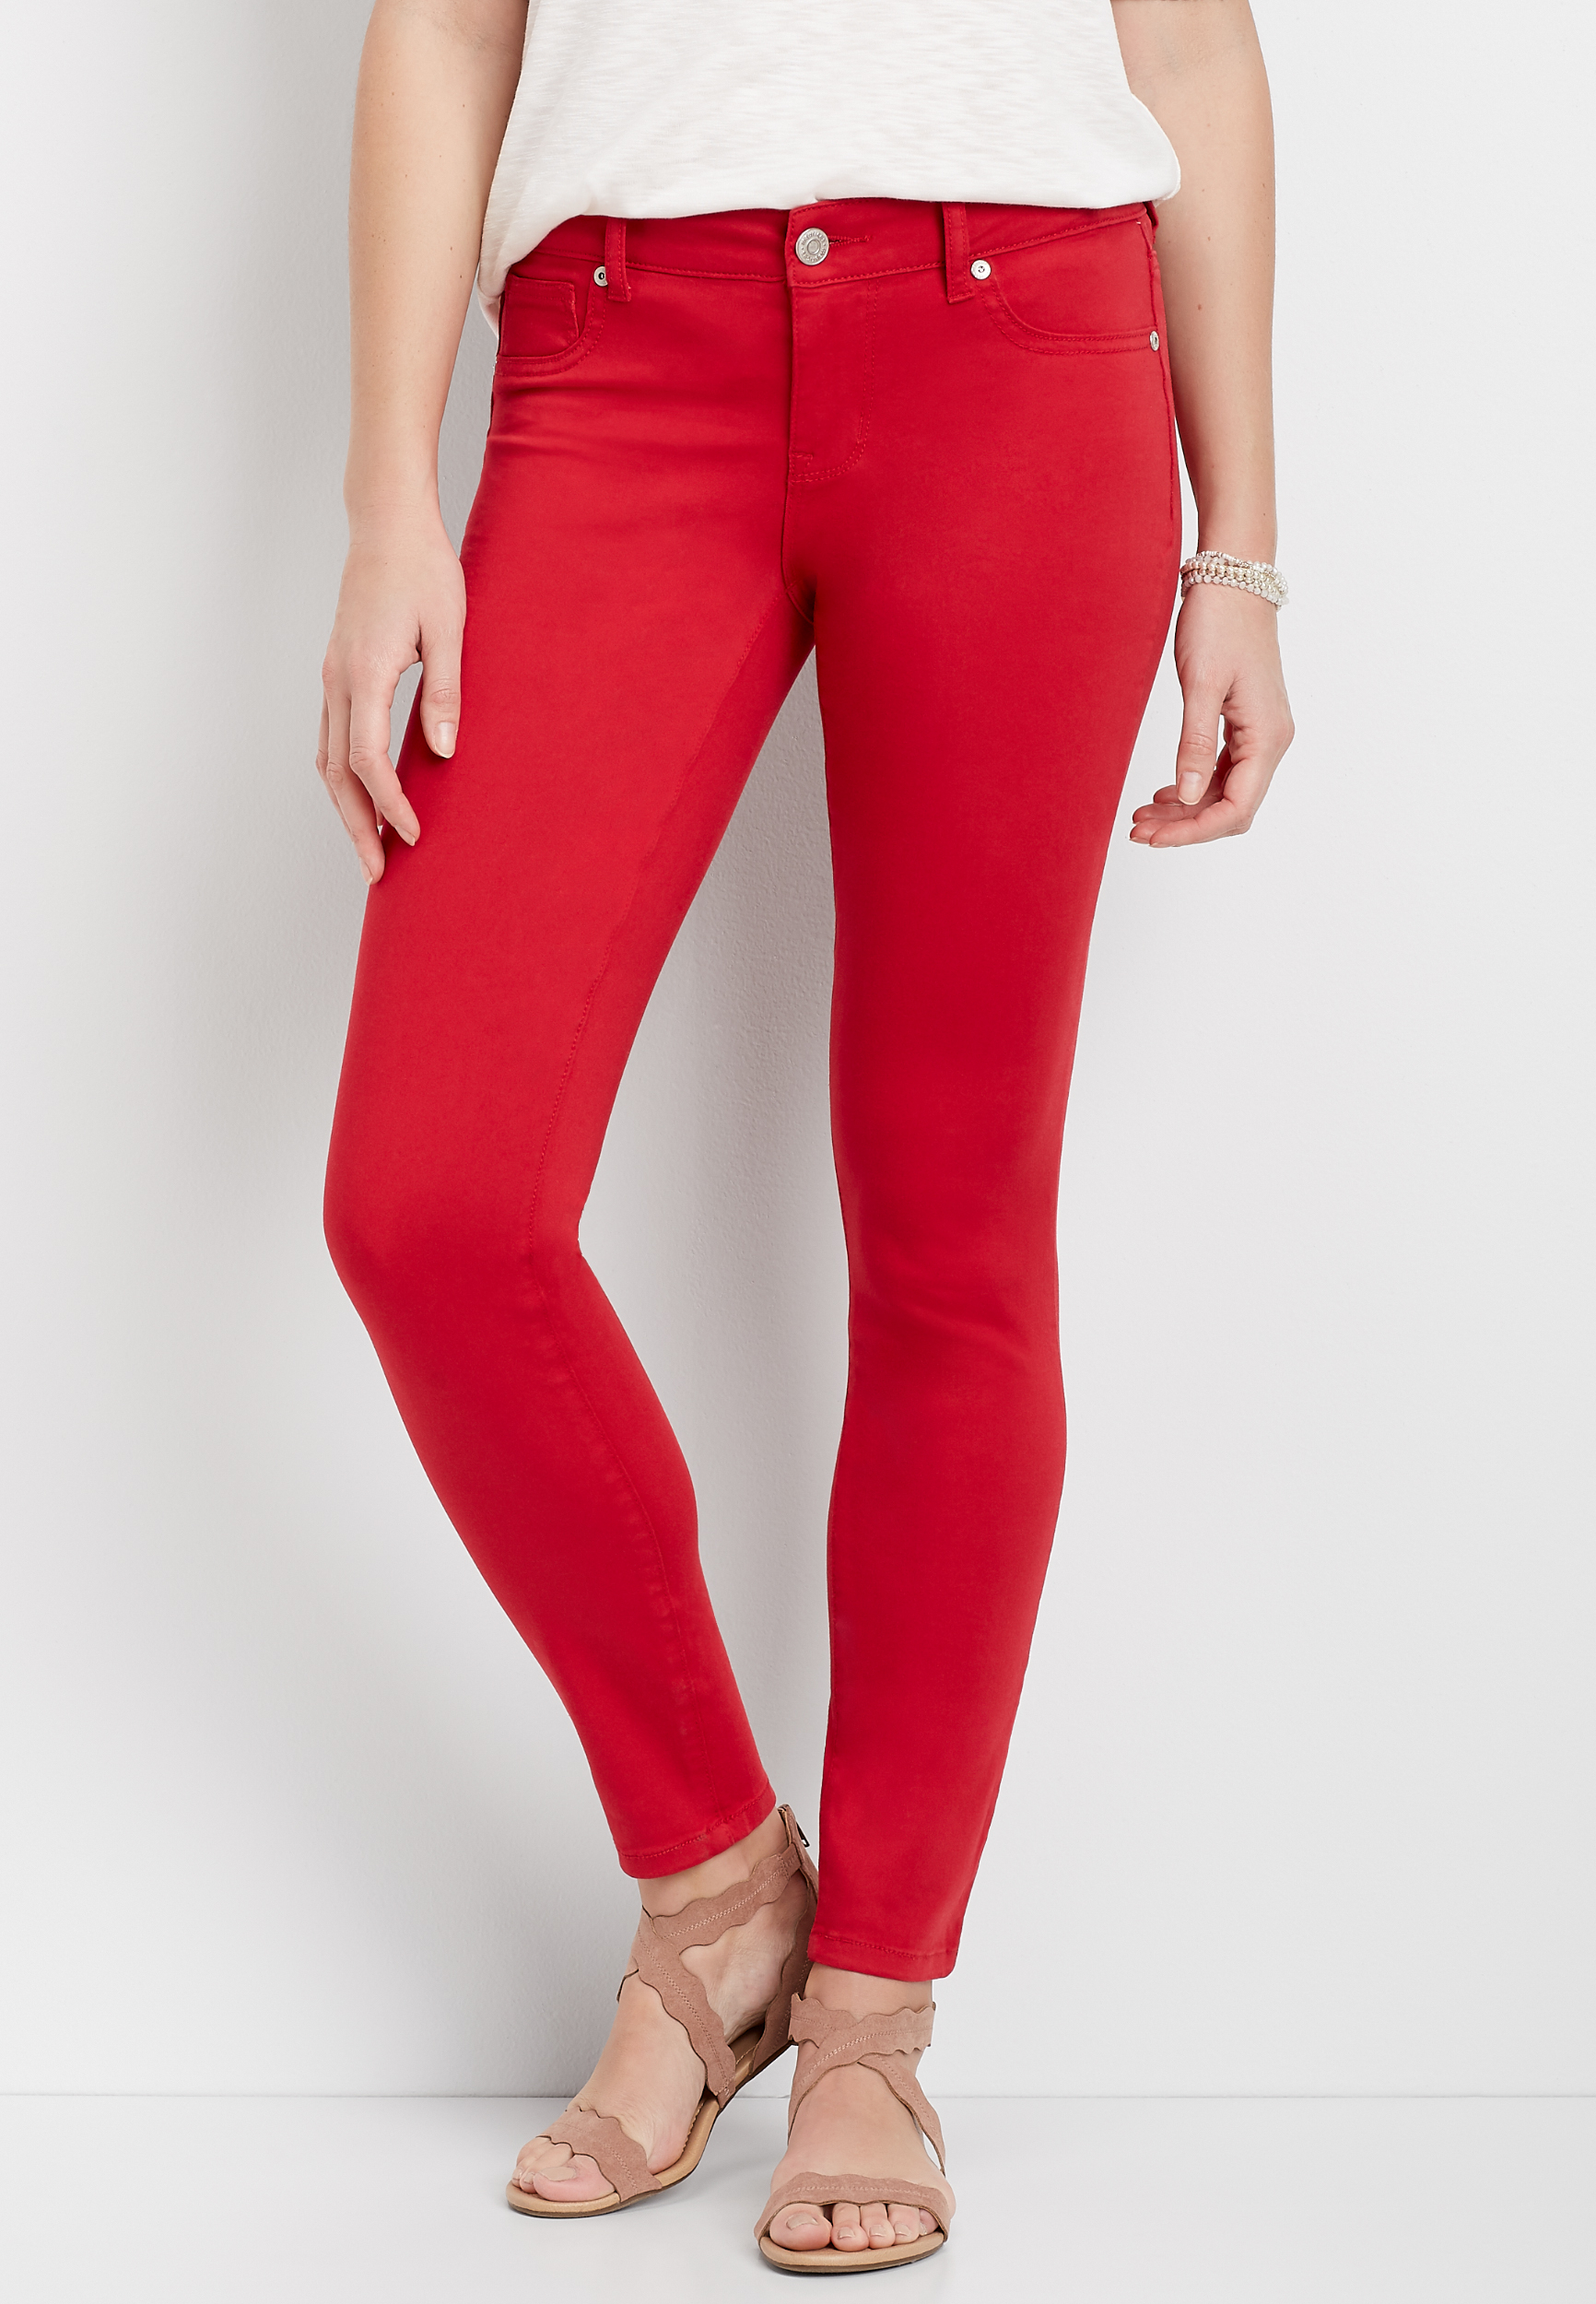 jeggings red